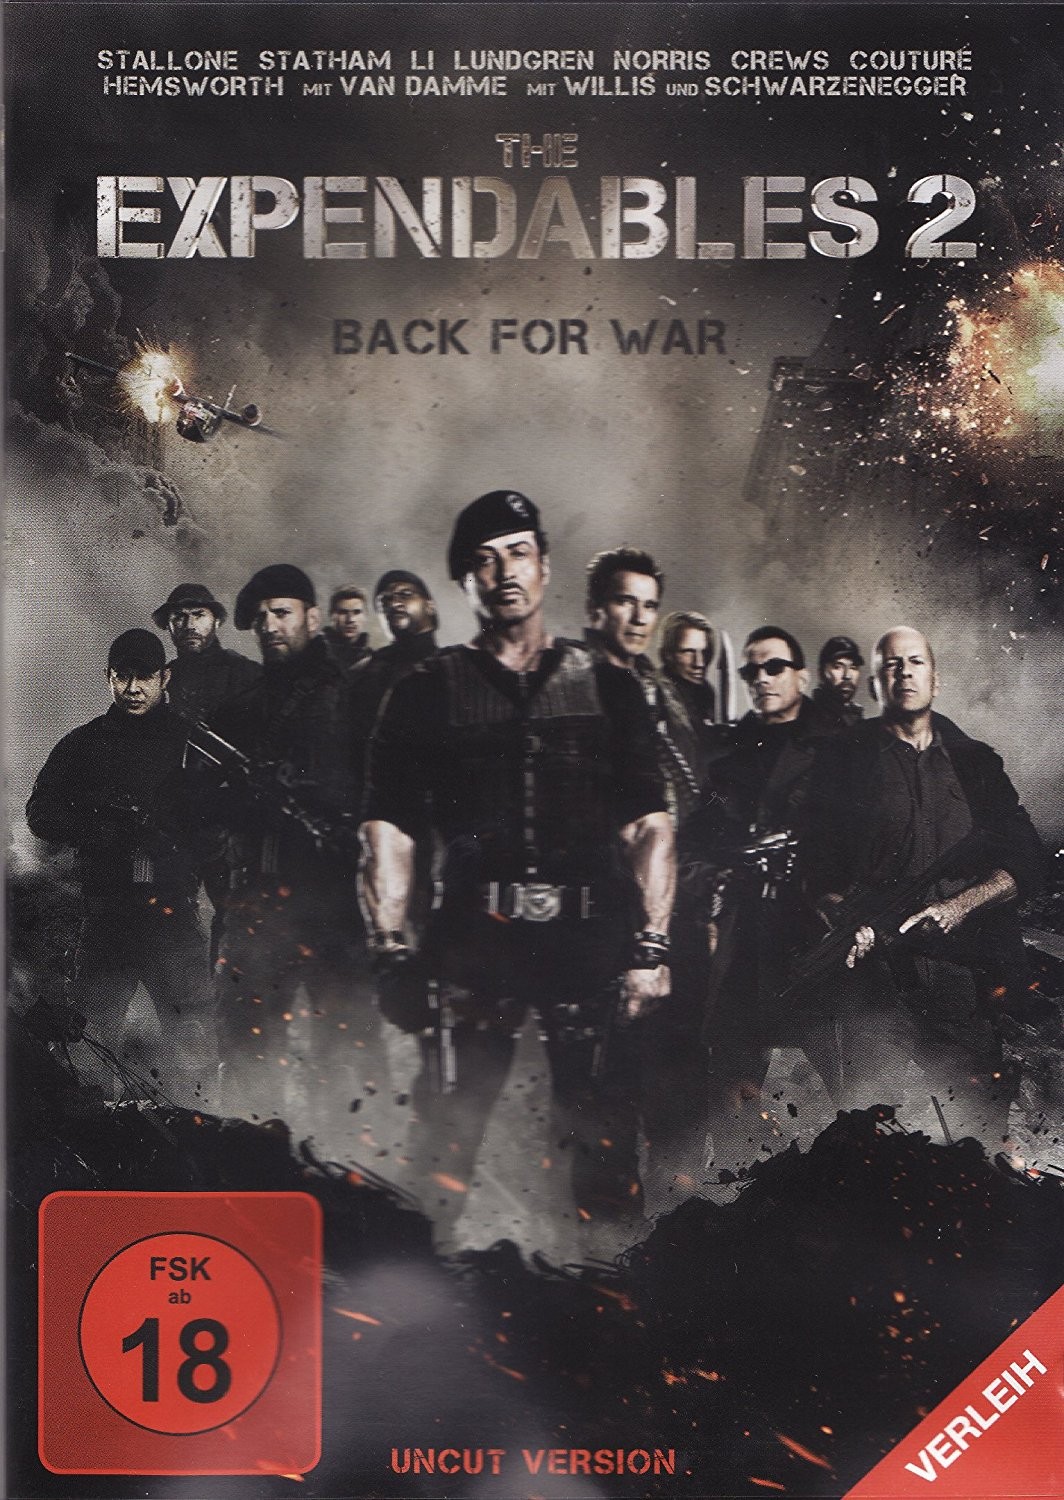 Dvd - The Expendables 2 - Back For War (Uncut Version)